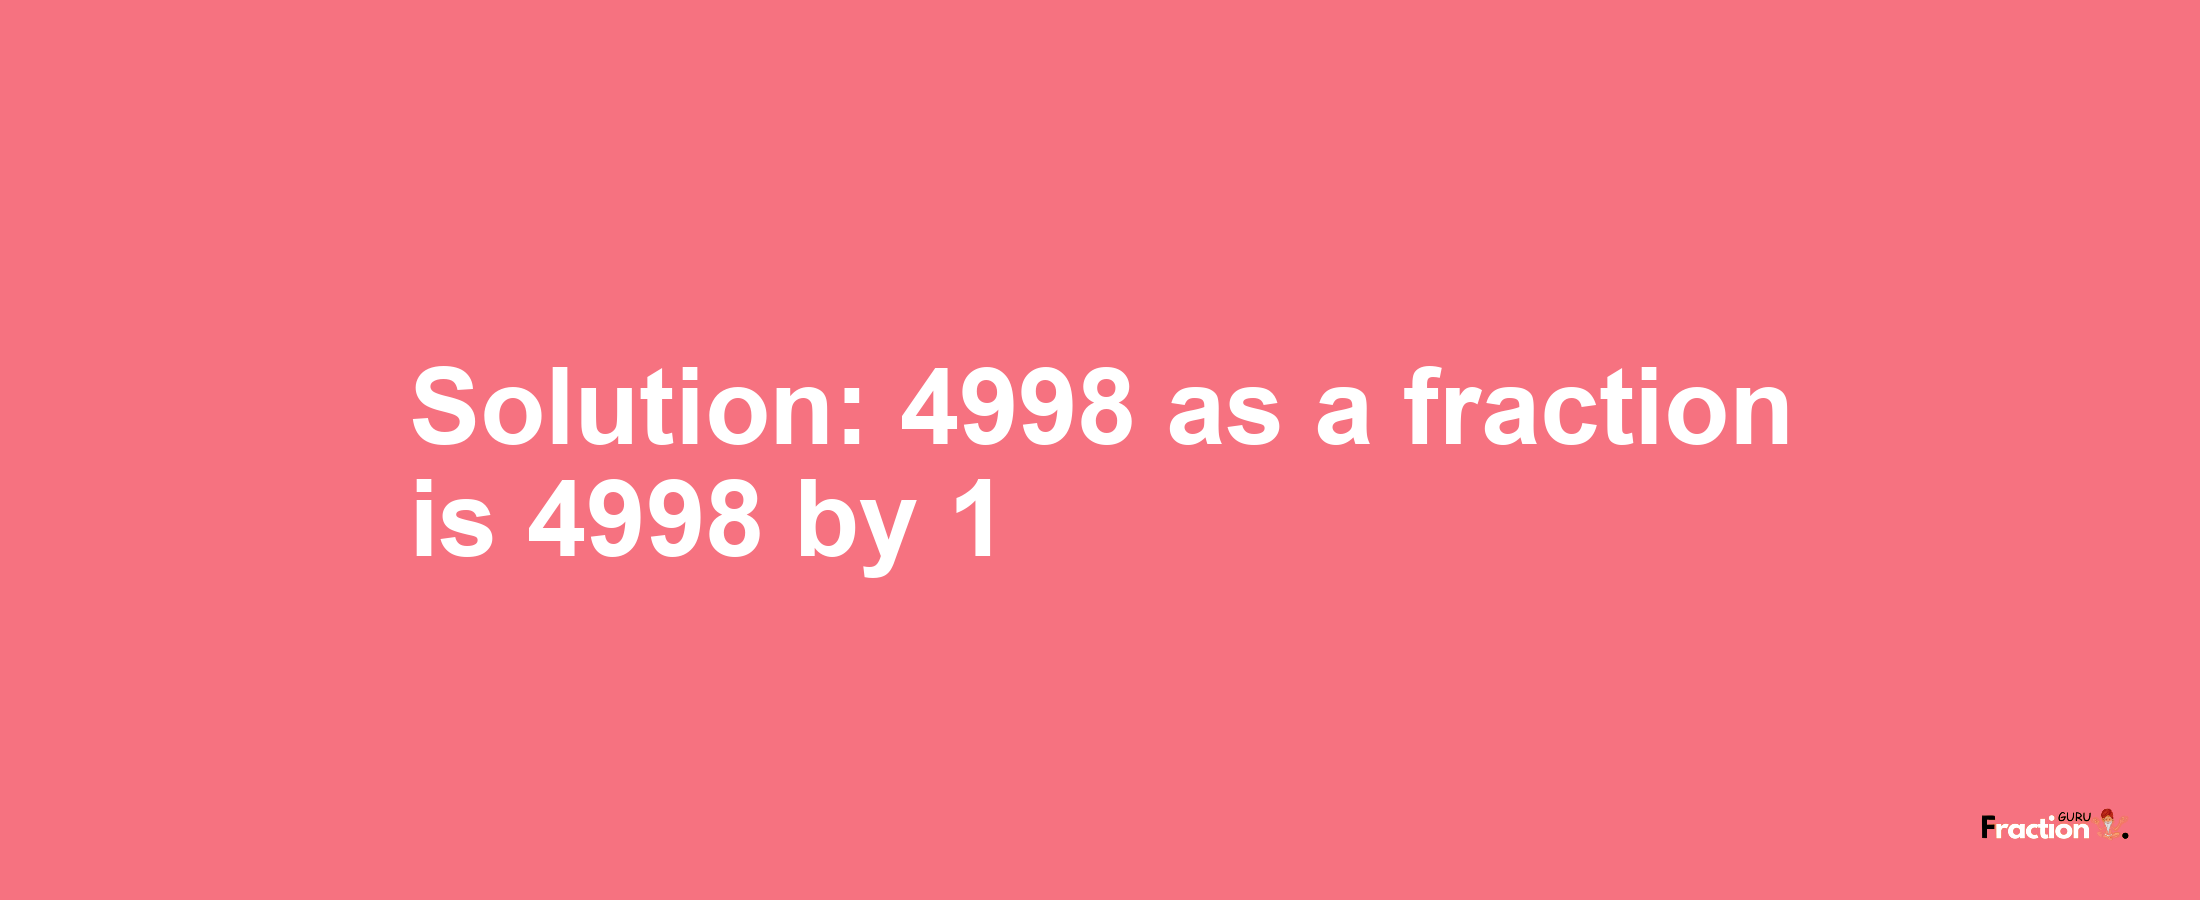 Solution:4998 as a fraction is 4998/1